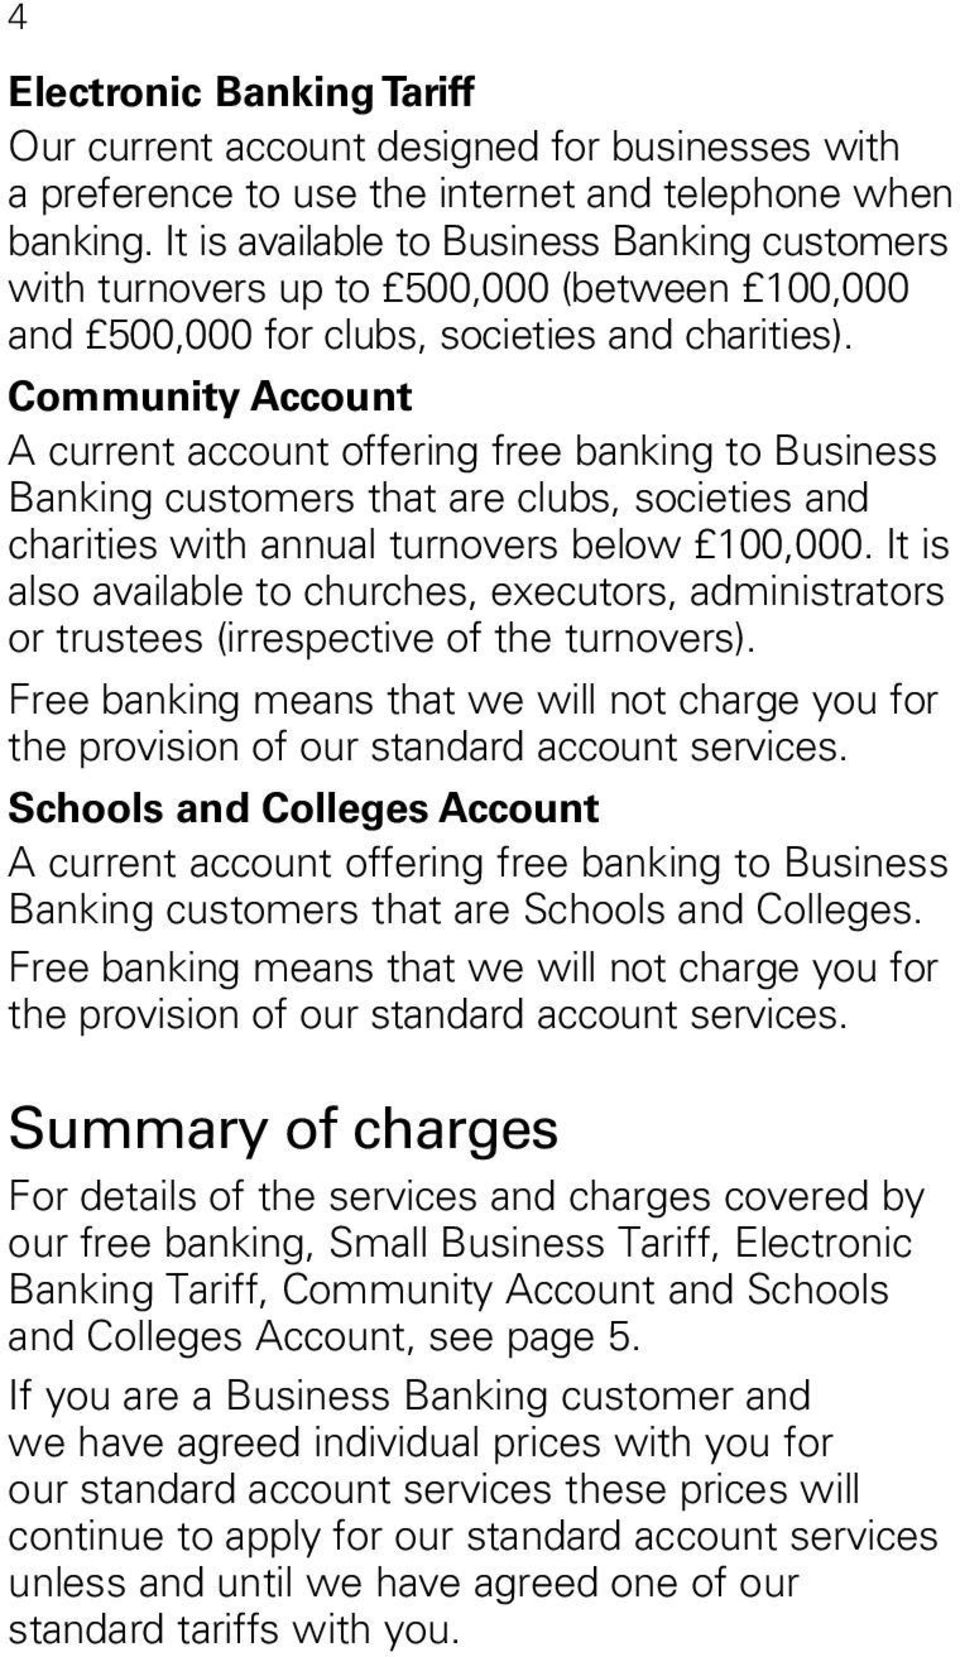 Community Account A current account offering free banking to Business Banking customers that are clubs, societies and charities with annual turnovers below 100,000.